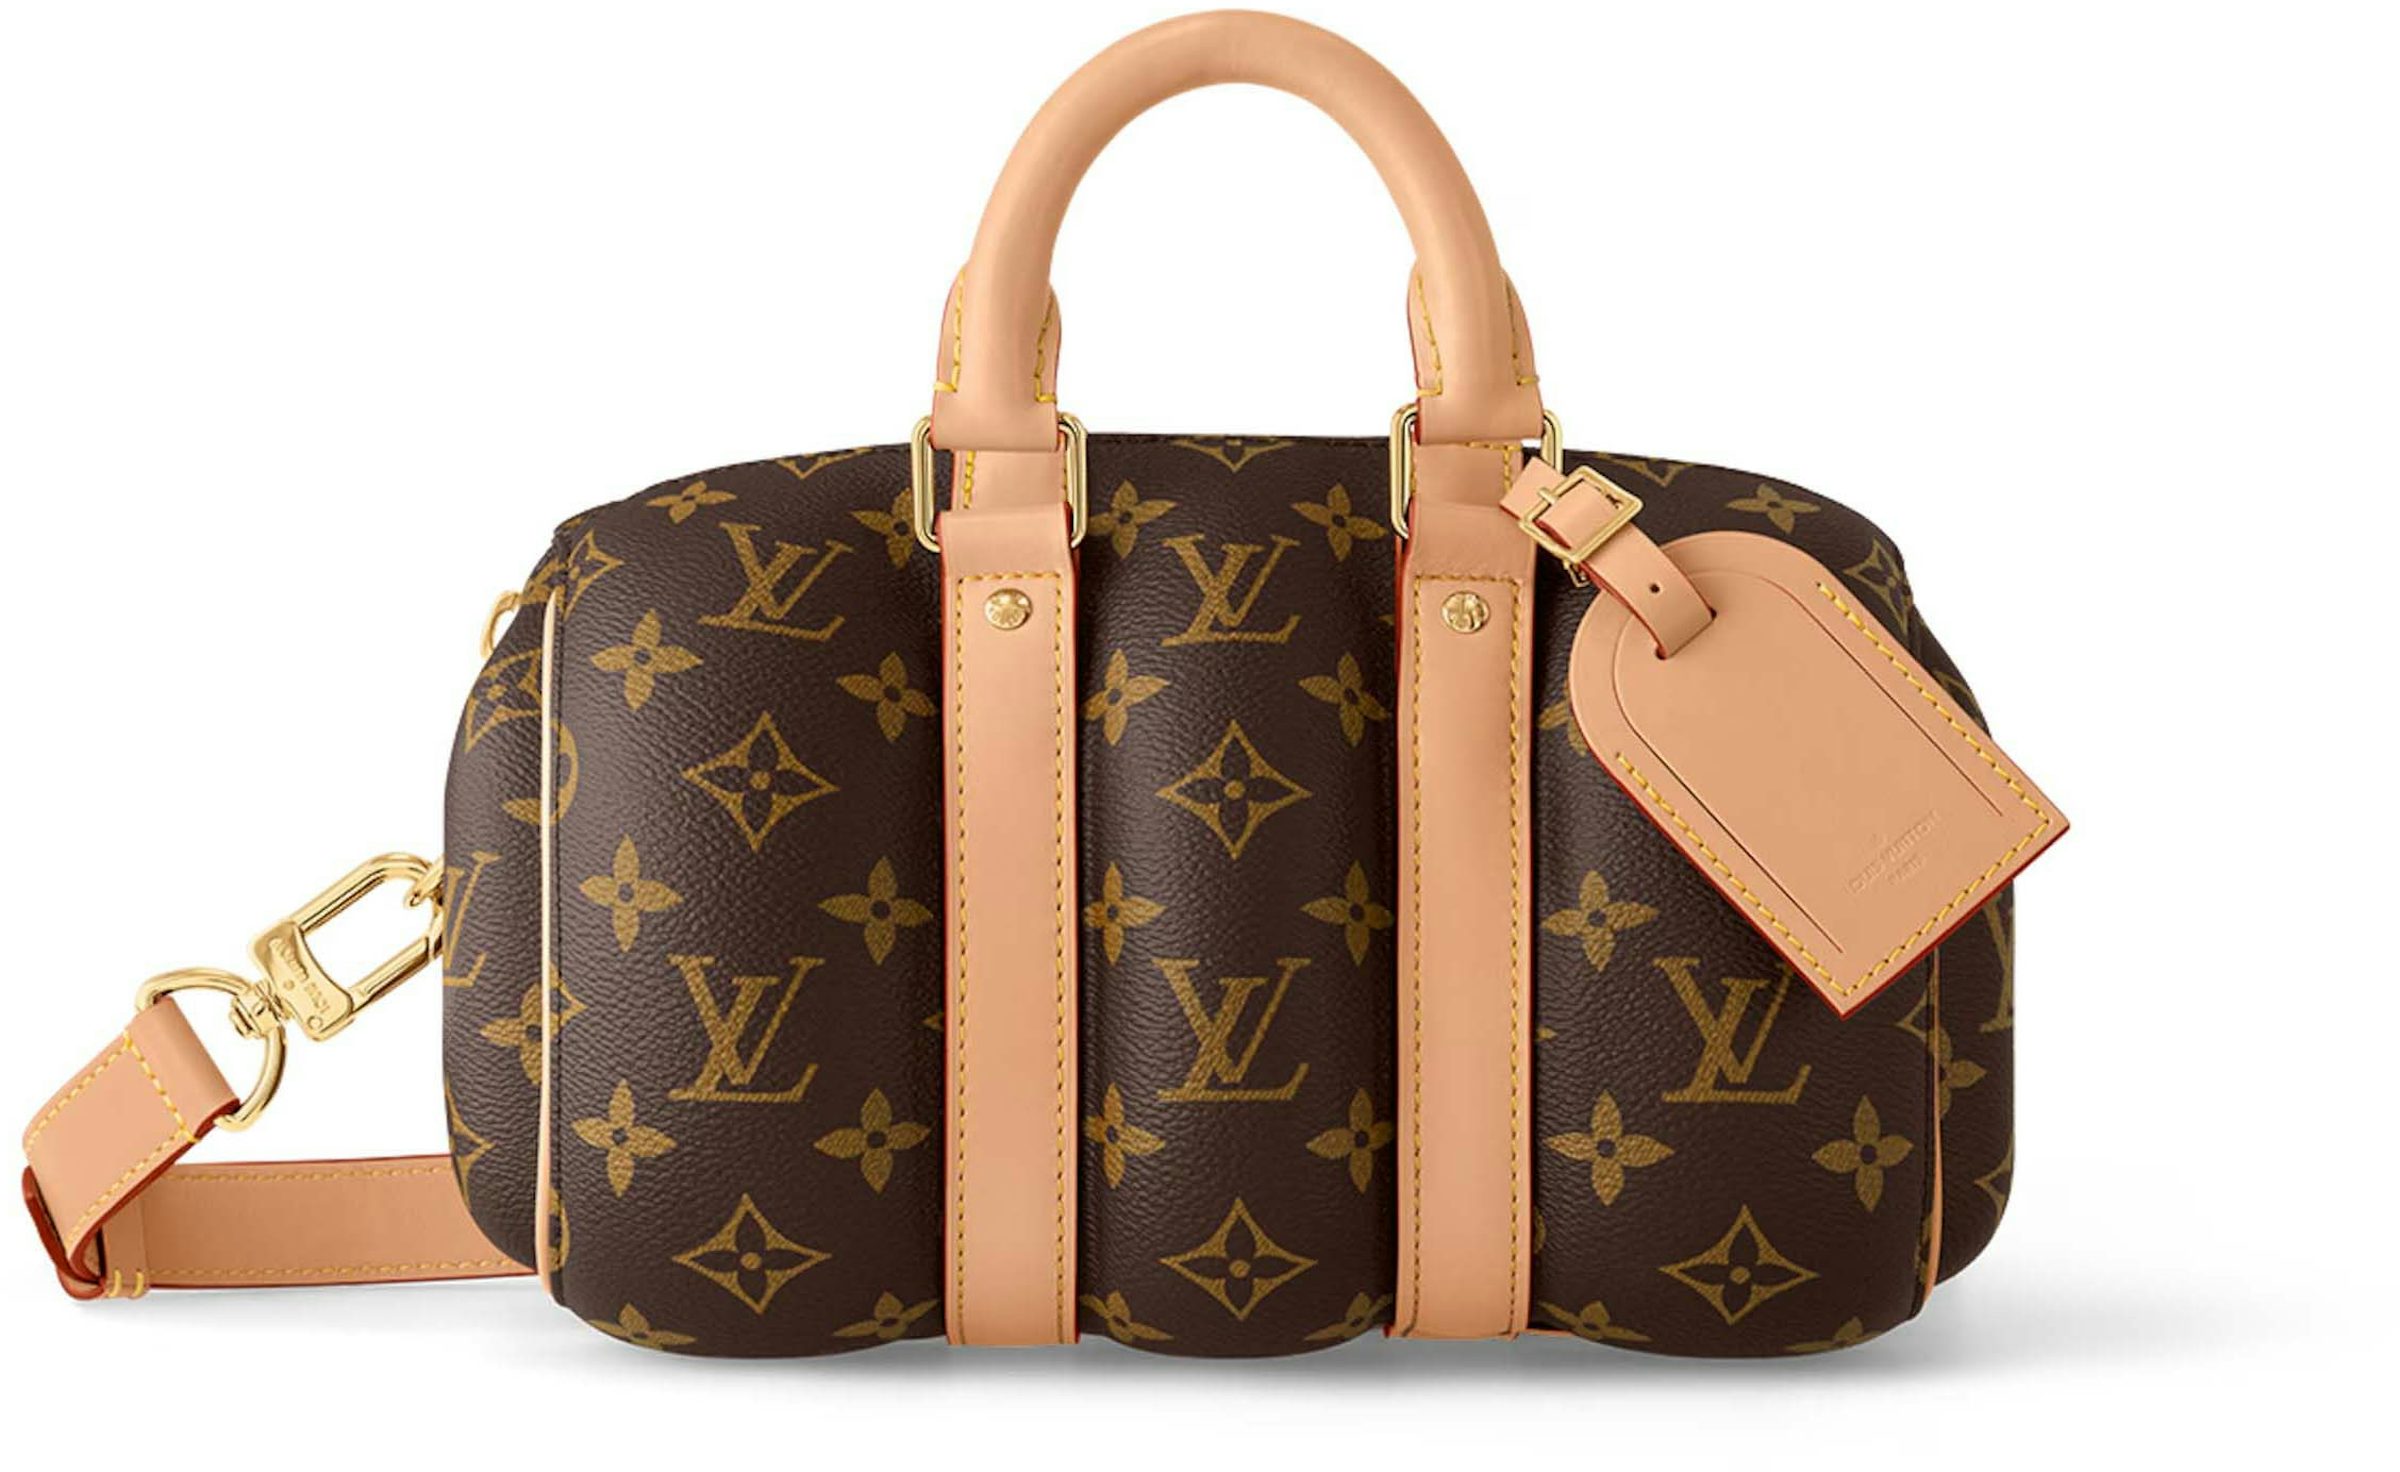 Louis Vuitton Keepall Bandouliere 25 (Blown Up) in Monogram Coated